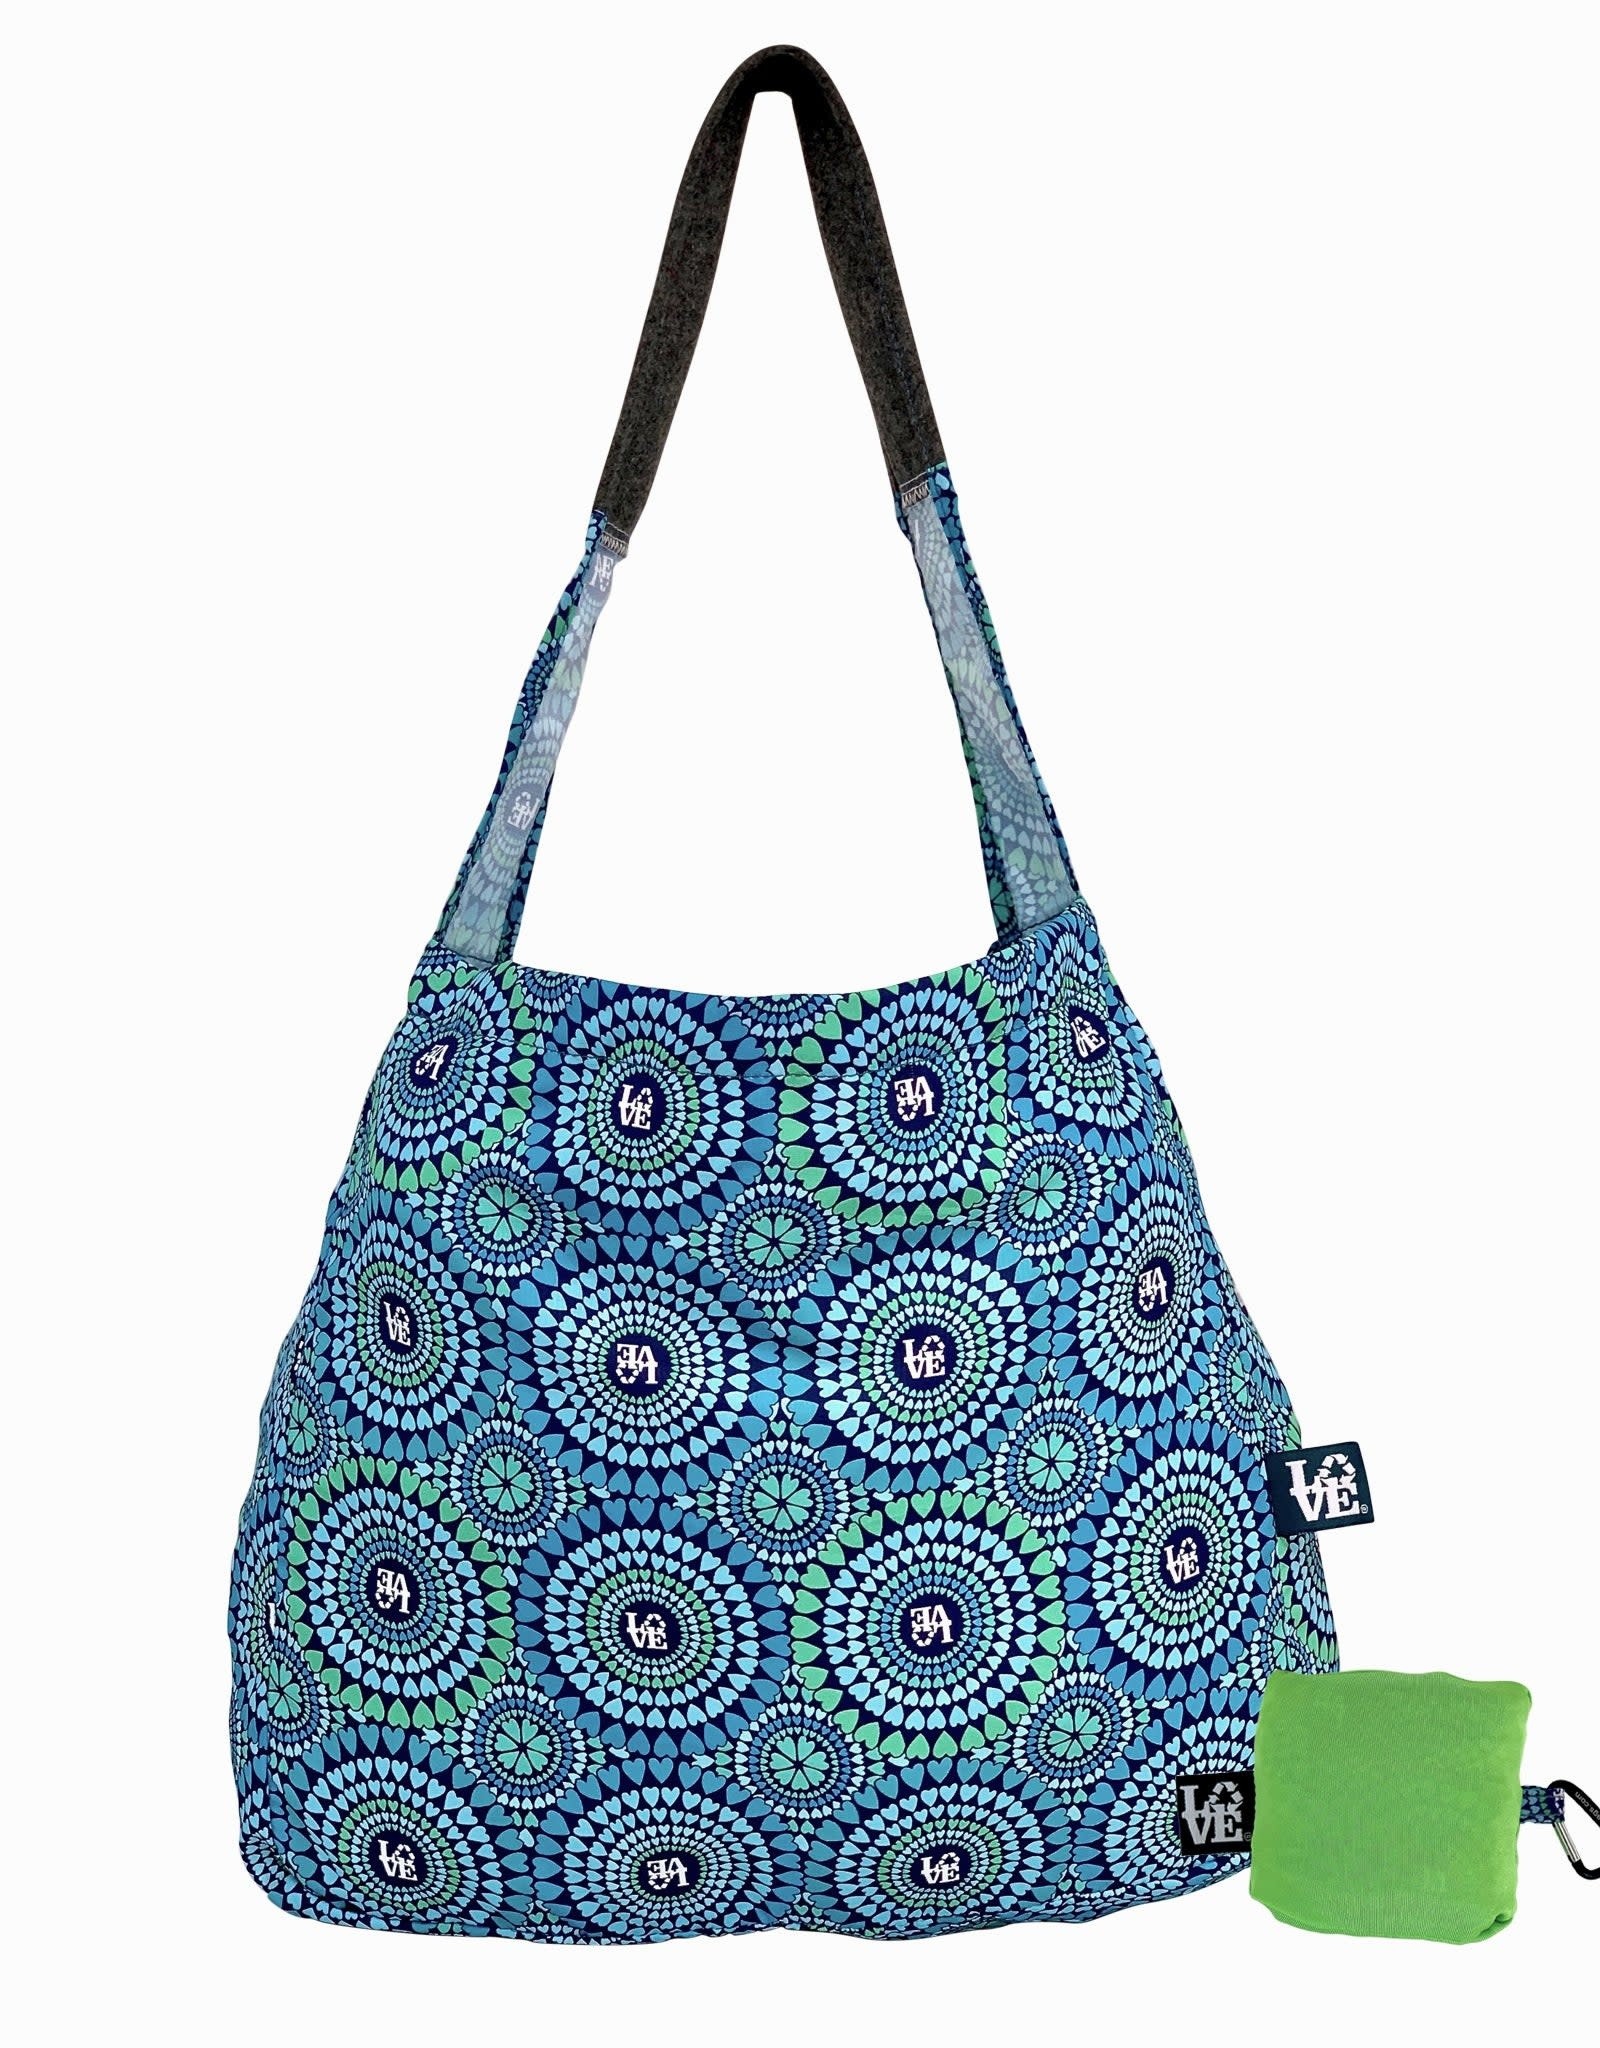 LOVE Recycled Stash Tote